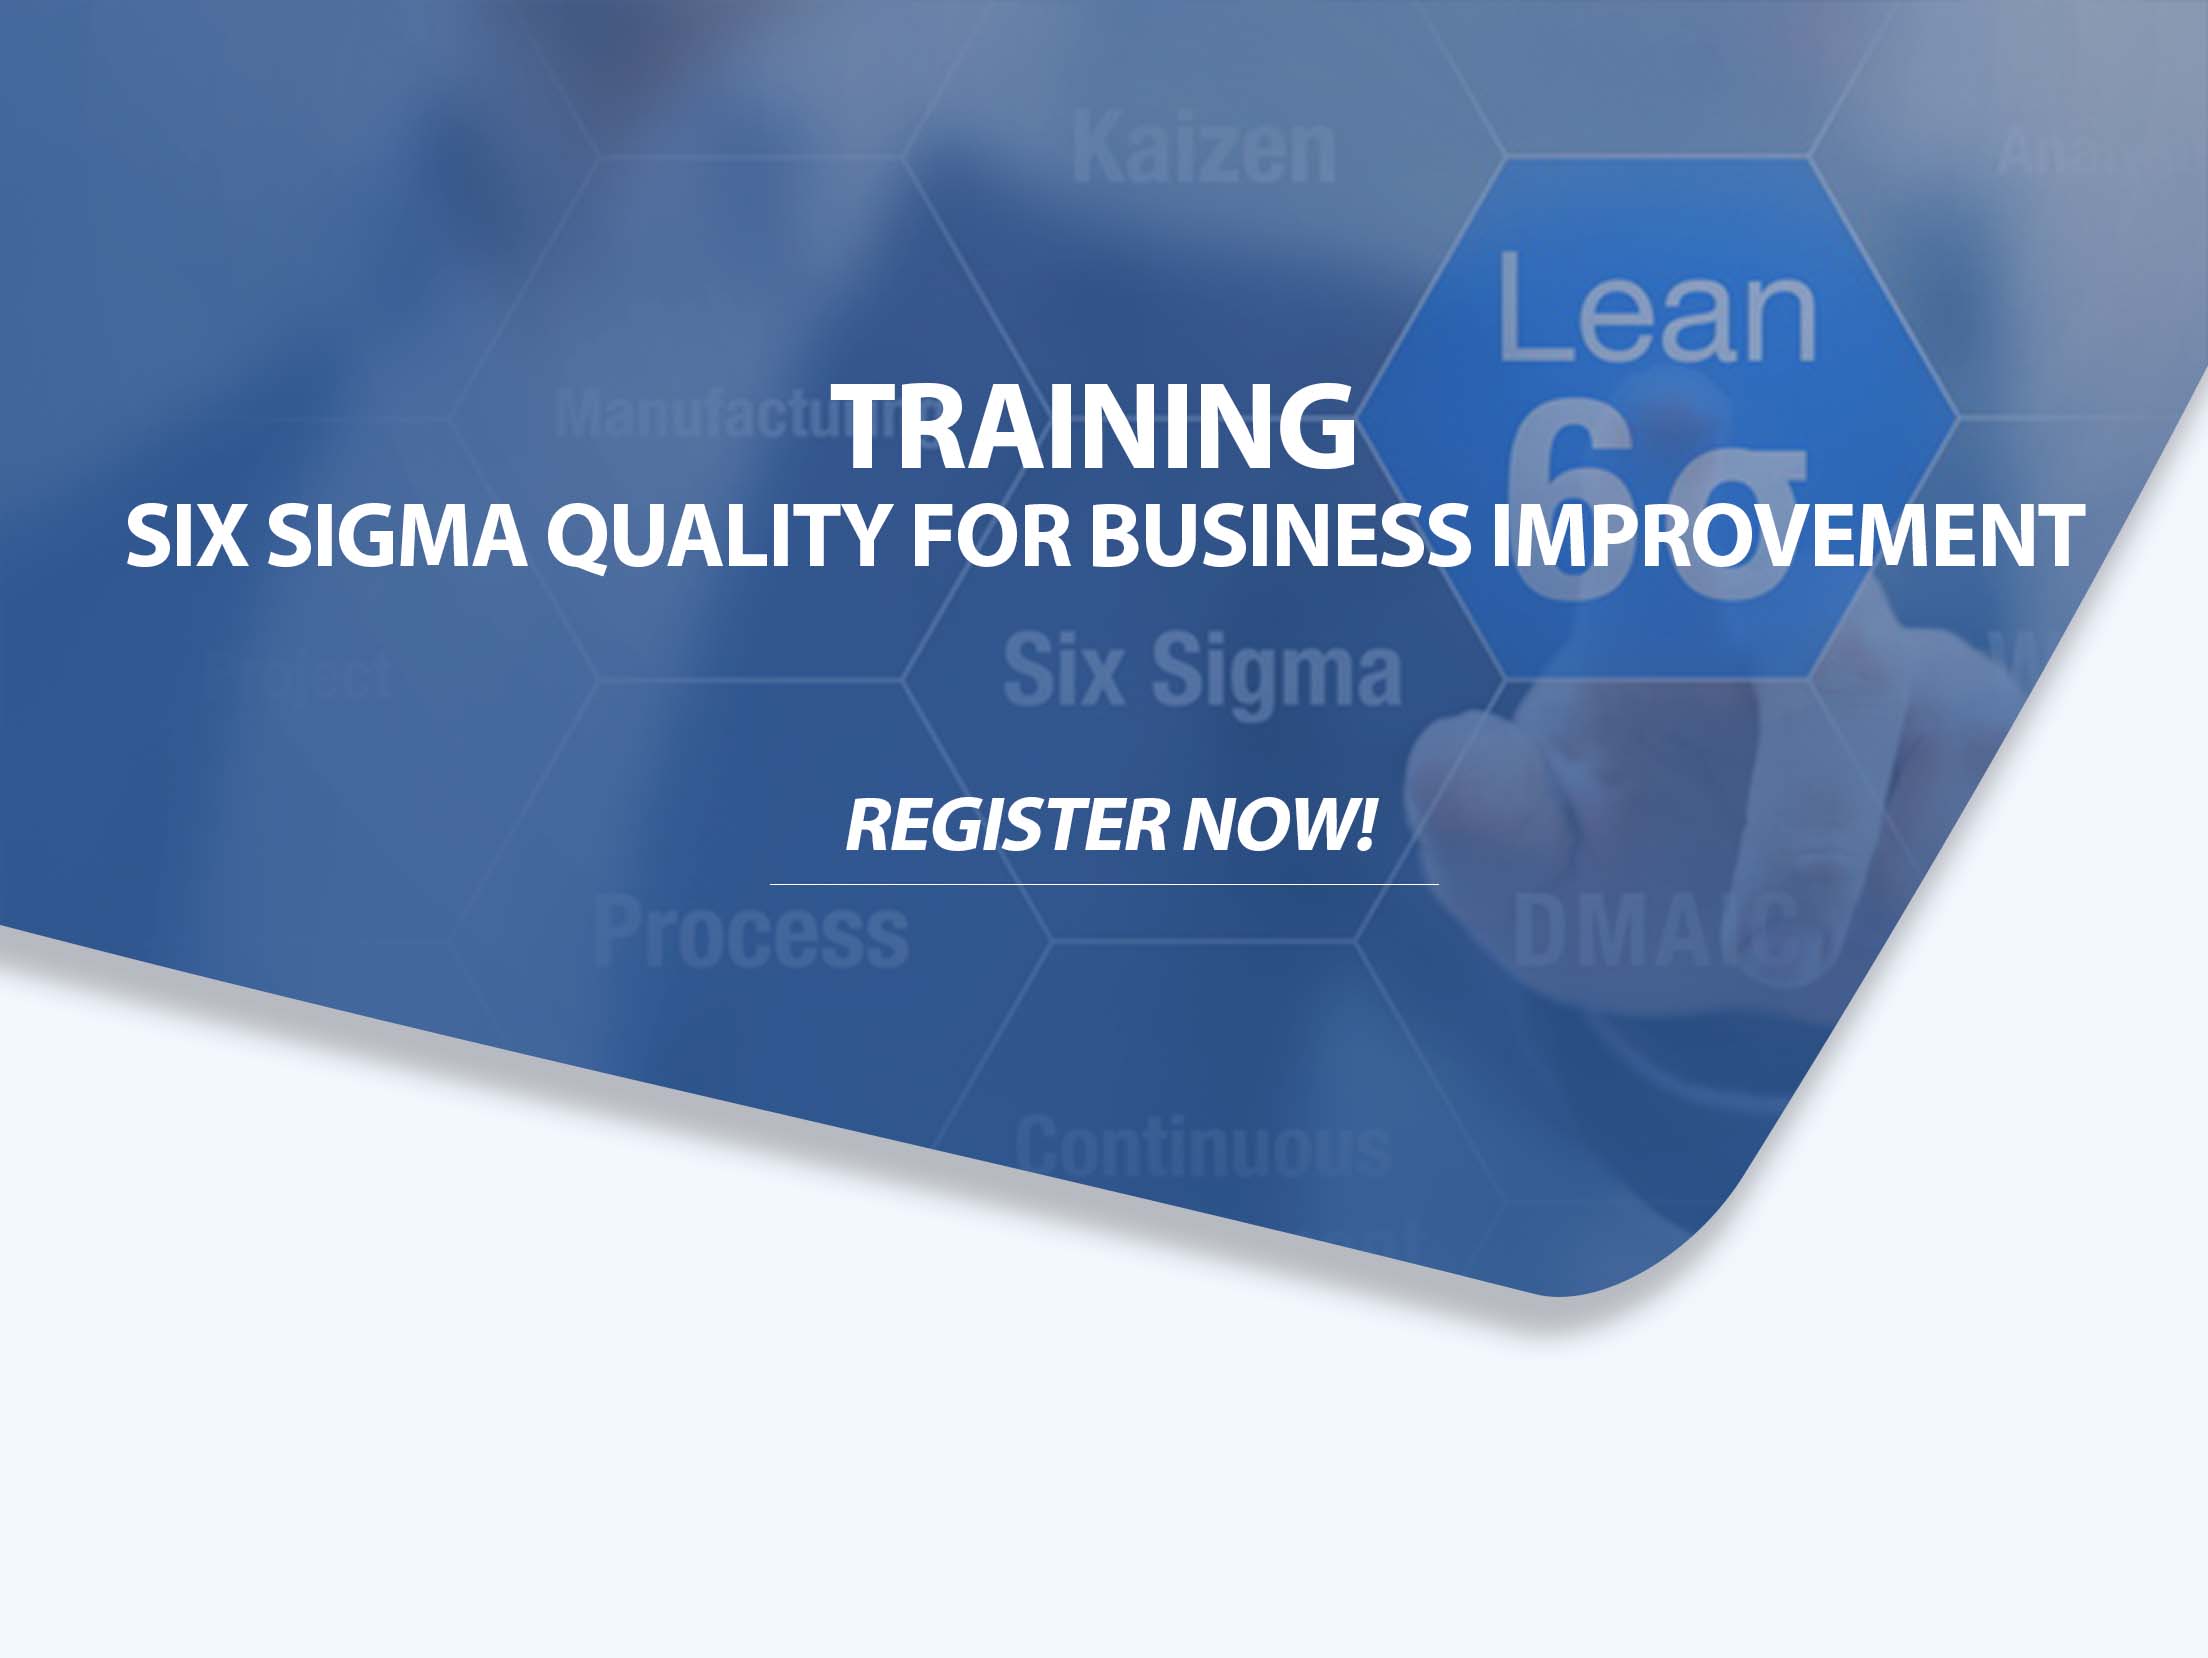 Six Sigma Quality for Business